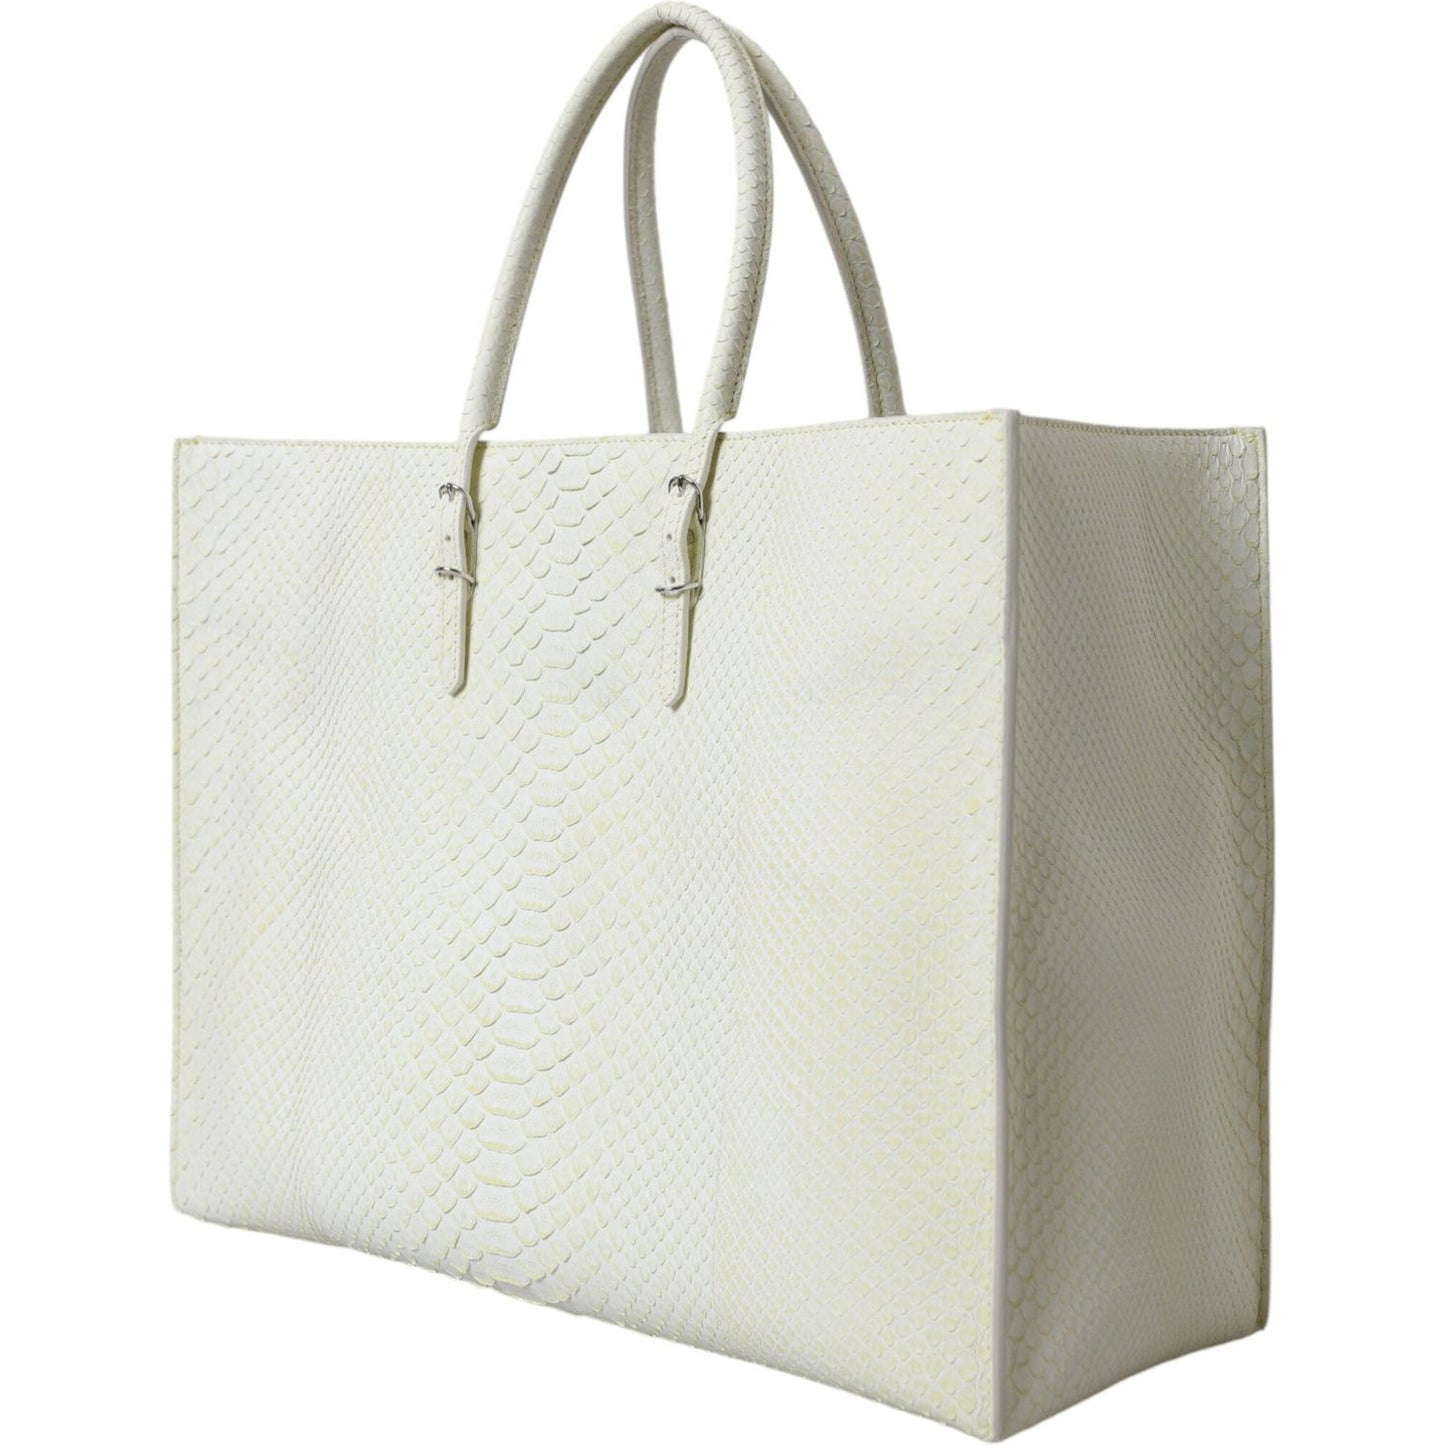 Chic Python Leather Tote in White & Yellow